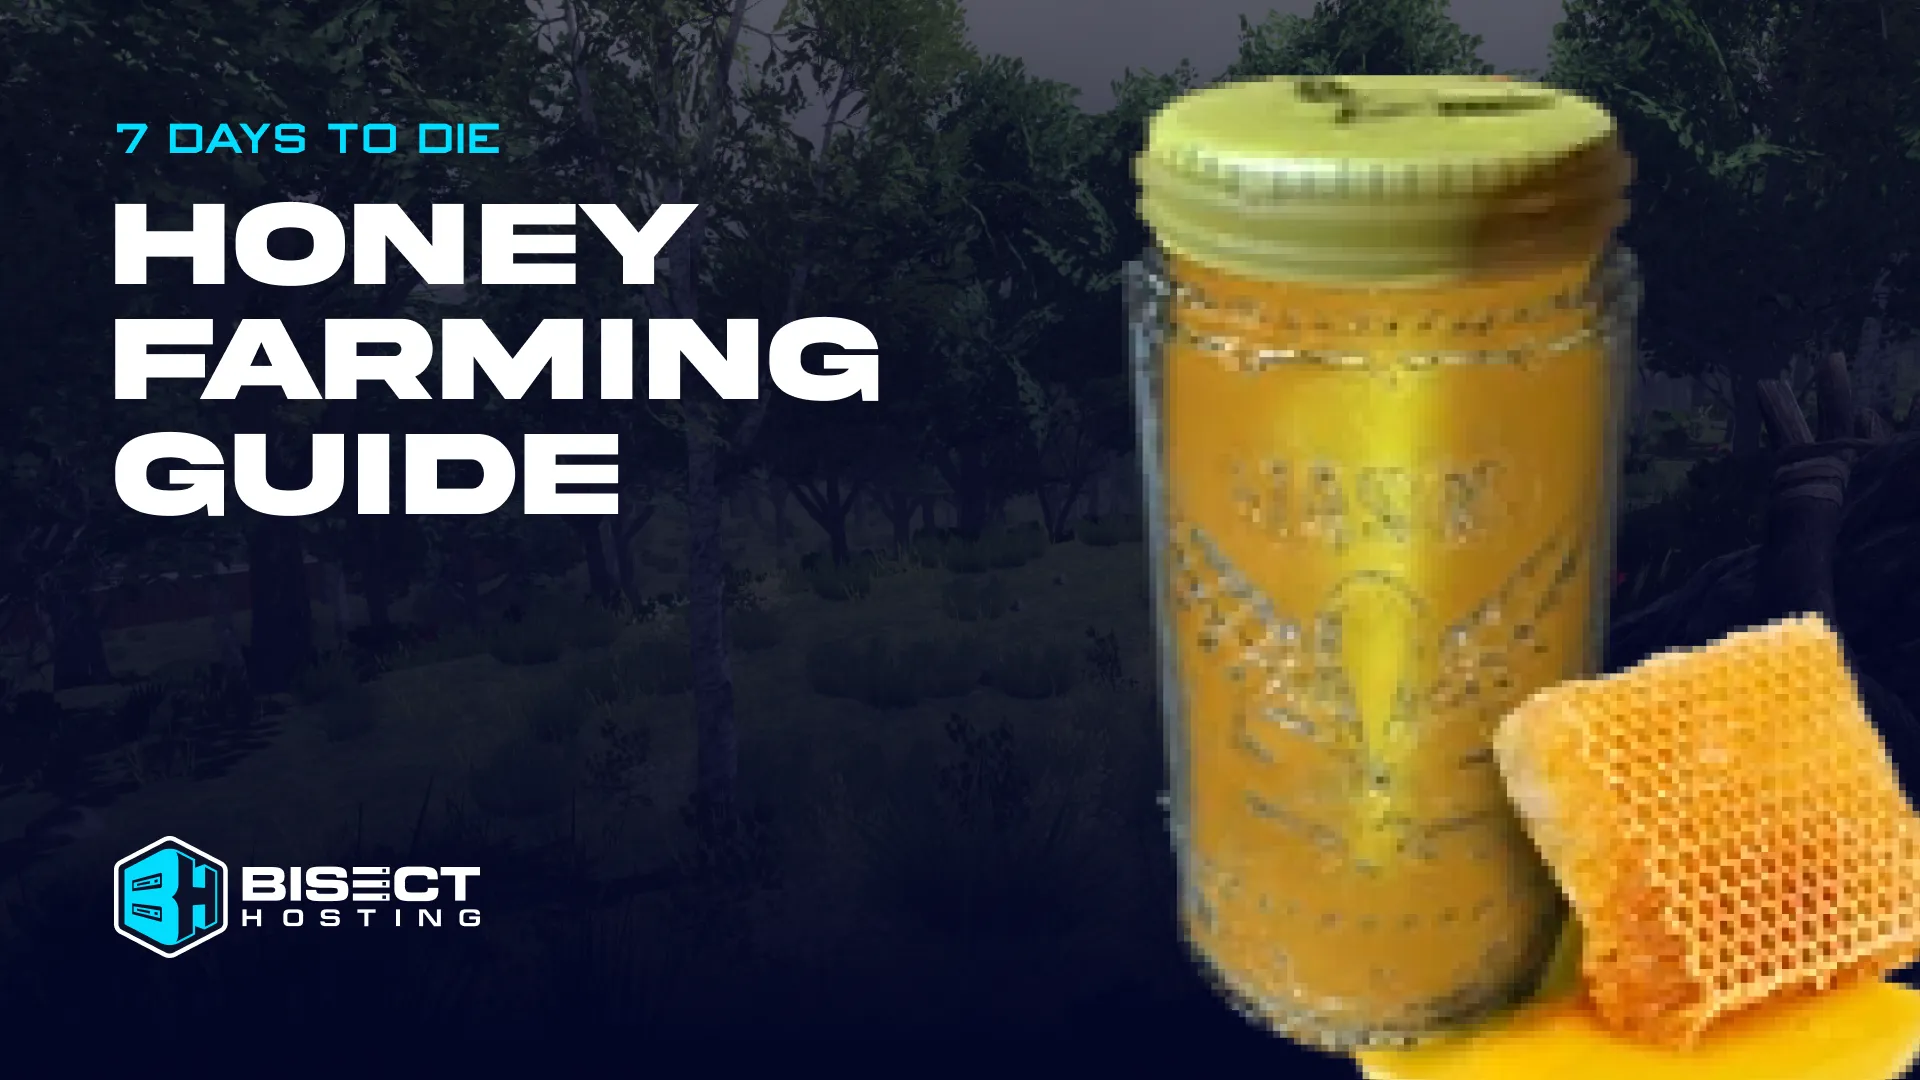 7 Days to Die Honey Farming Guide: Locations, Uses, & More